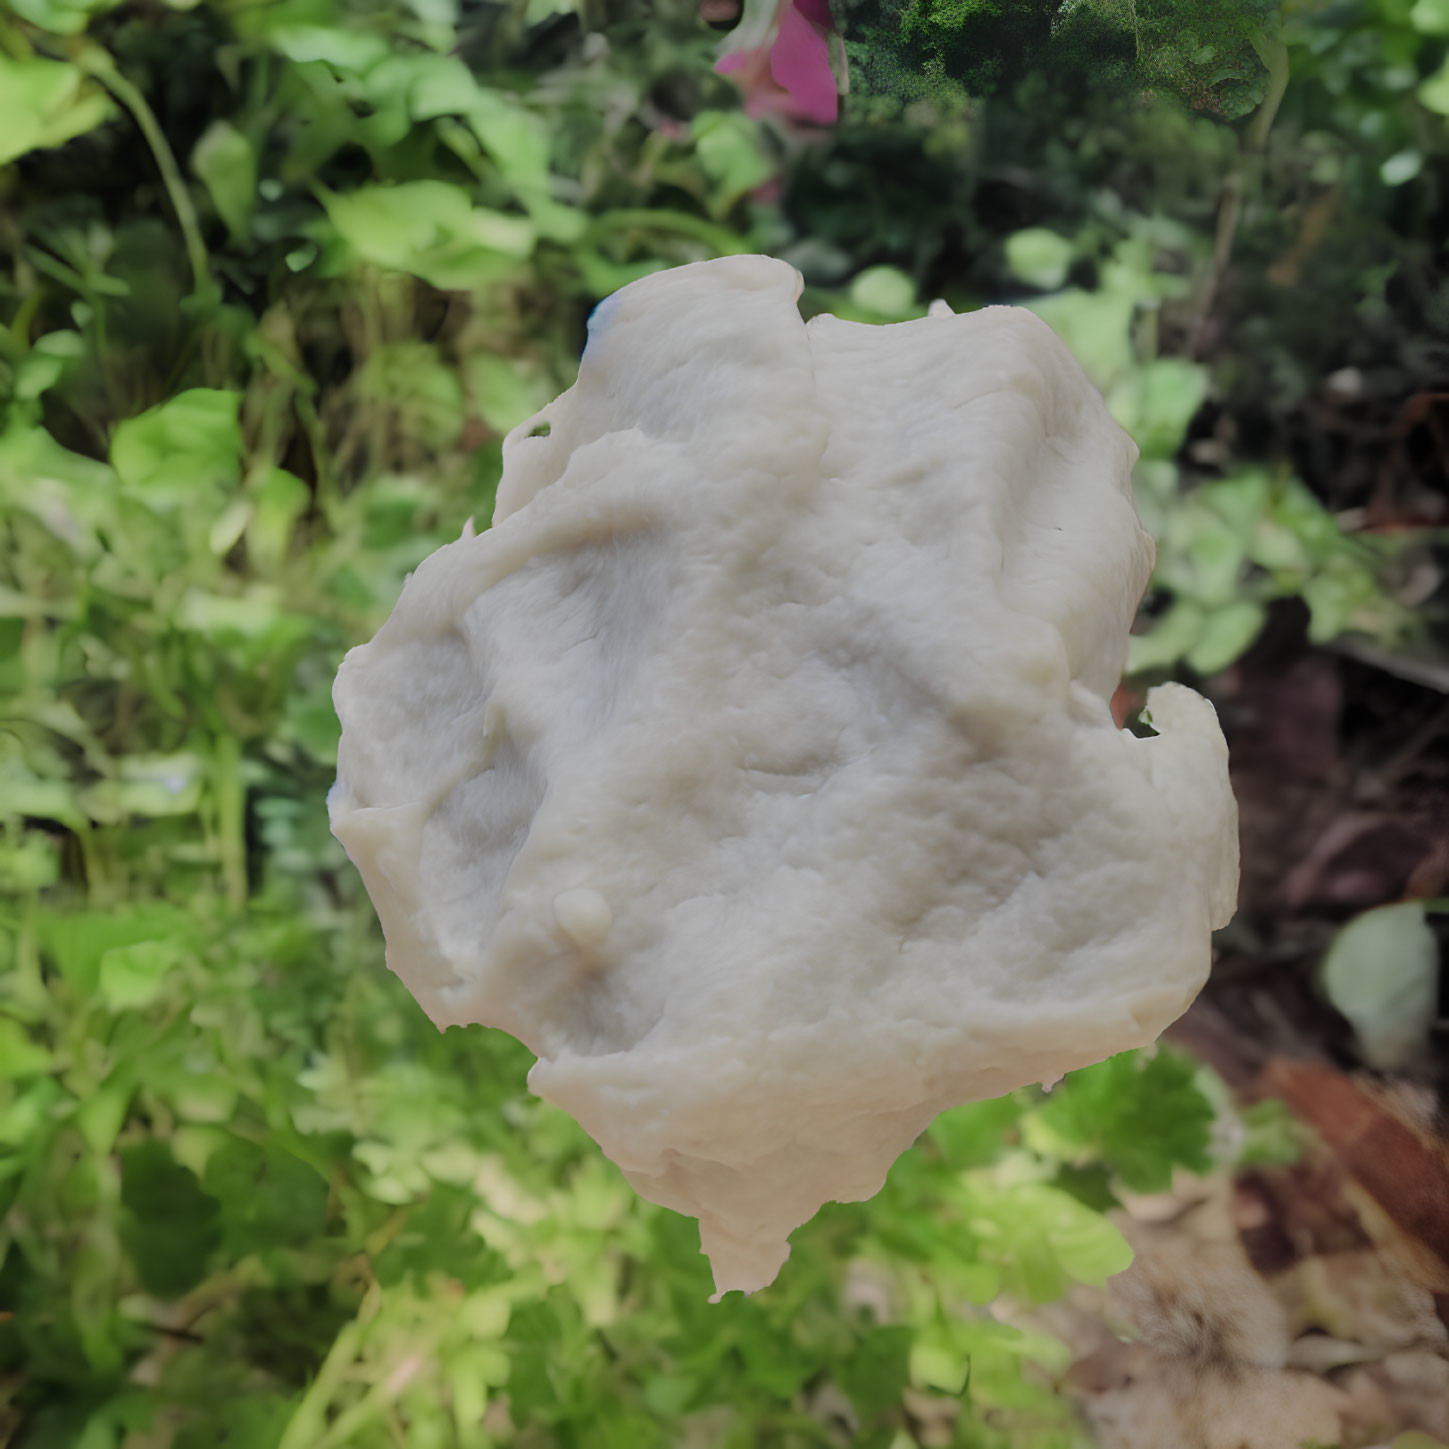 White Irregular Fungal Growth Close-Up with Blurred Green Background